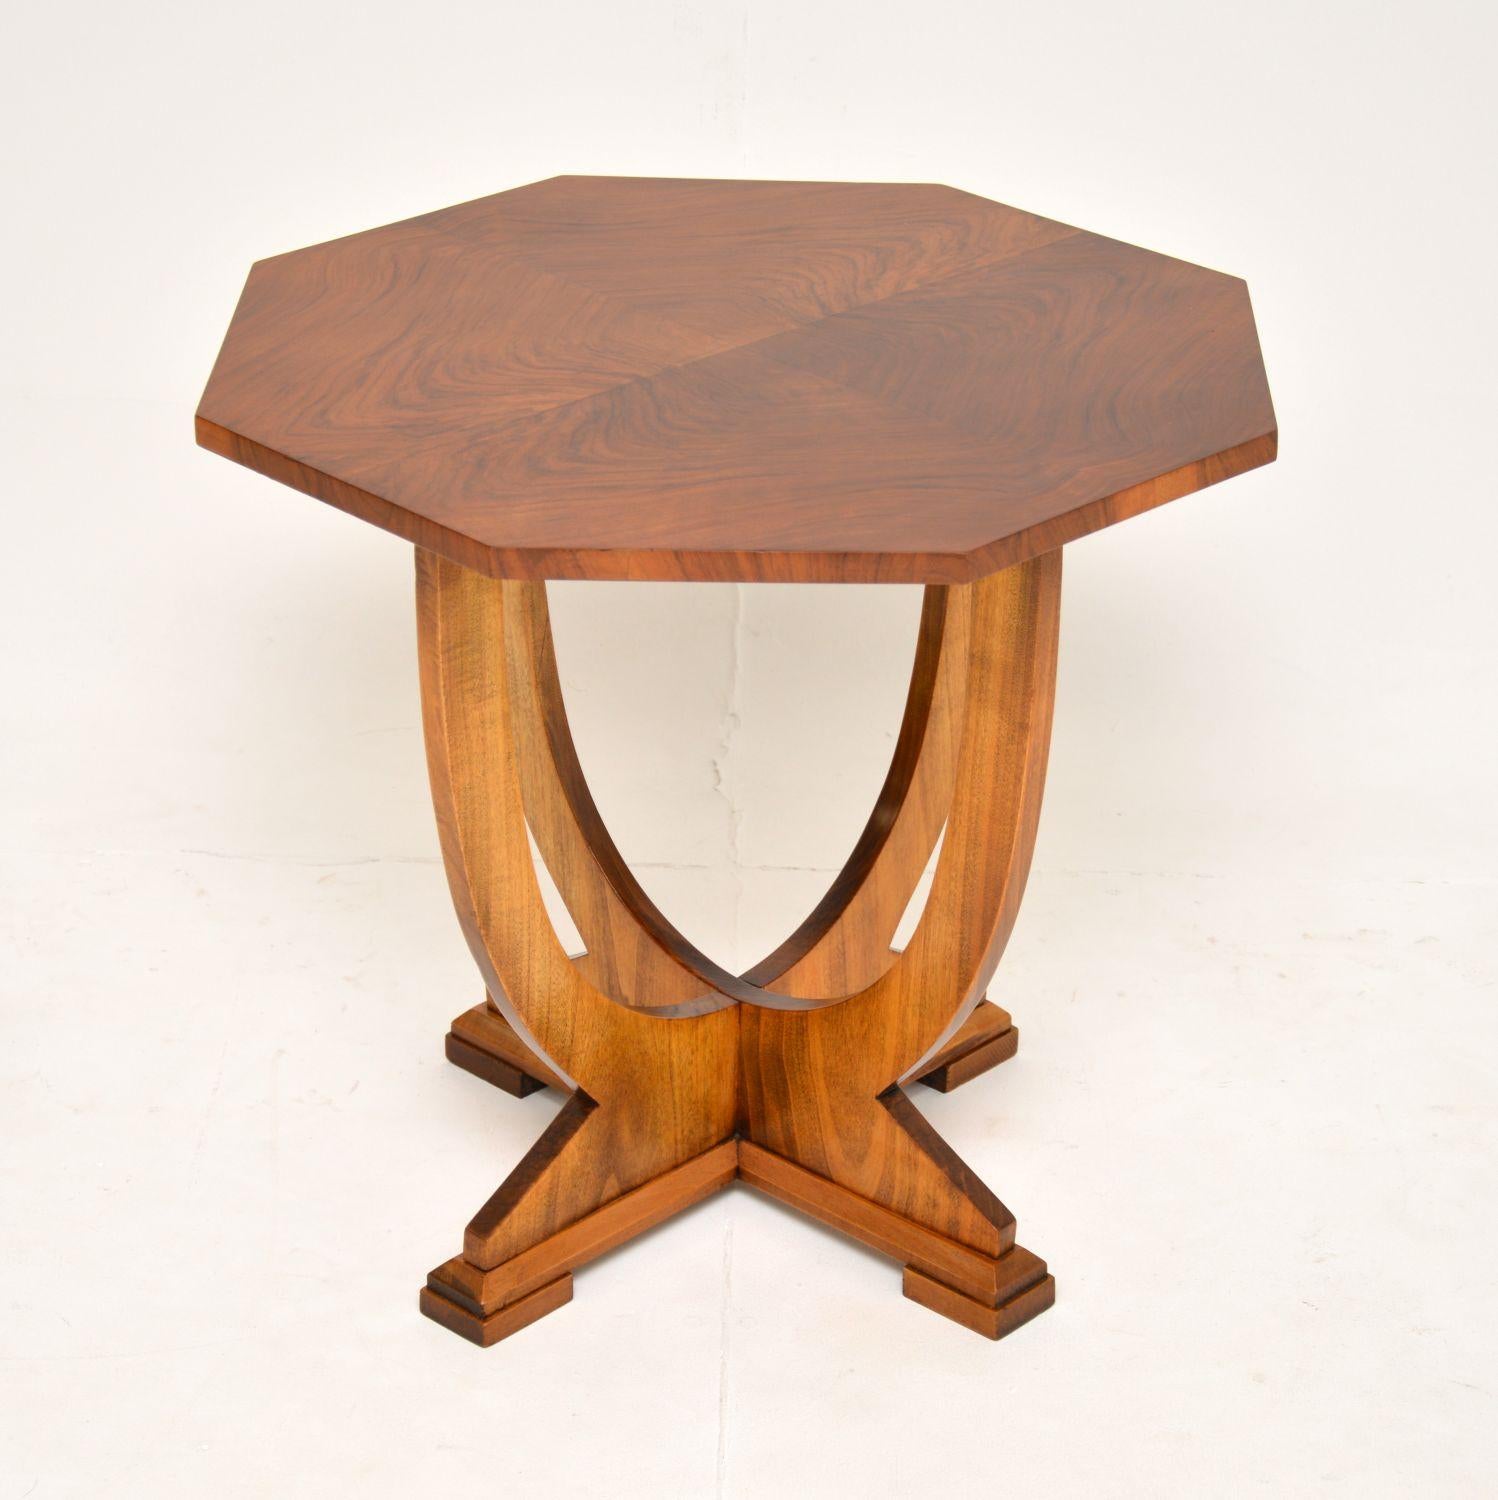 A beautiful and extremely well made original Art Deco period coffee / side table in walnut. This was made in England, it dates from the 1930’s.

It is beautifully designed and is of super quality. The octagonal top is segmented, with stunning